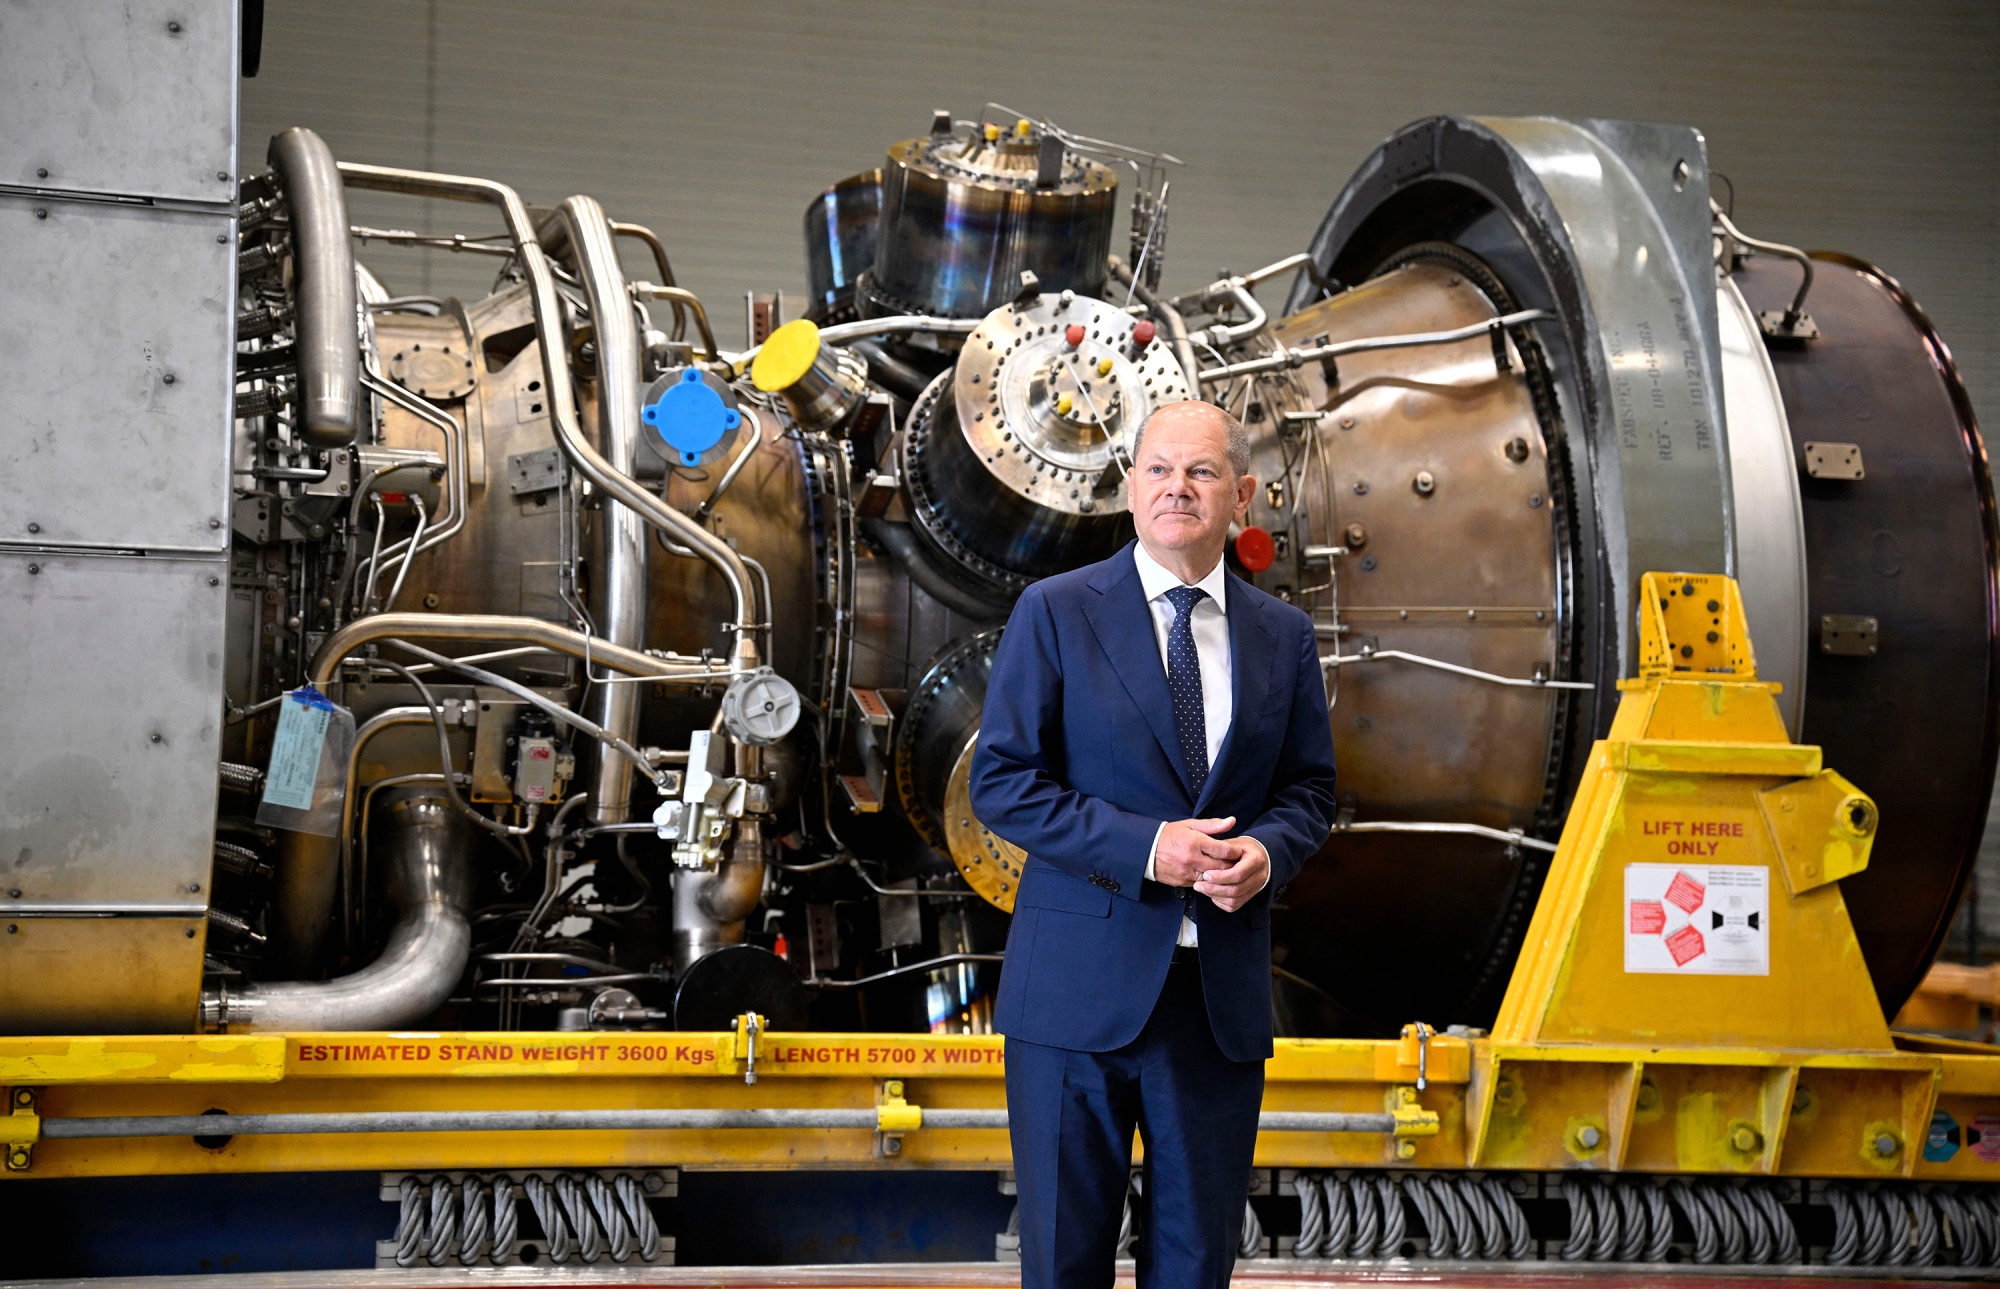 Olaf Scholz in front of a Nord Stream 1 pipeline turbine at the&nbsp;Siemens Energy plant in Muelheim an der Ruhr,&nbsp;Germany, on Aug. 3.